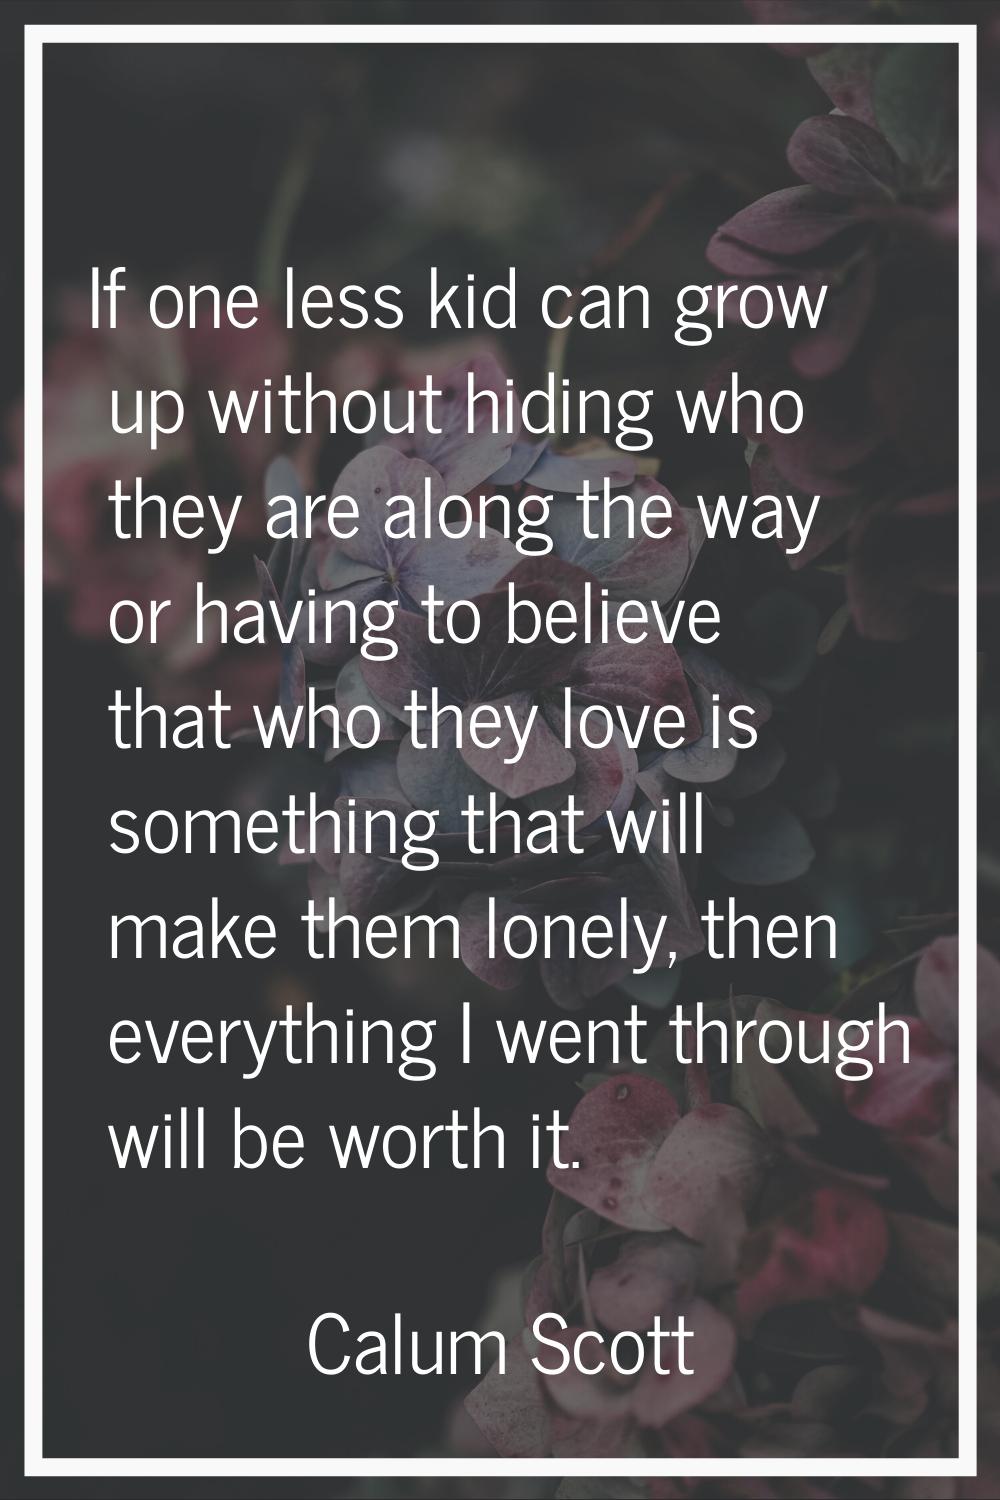 If one less kid can grow up without hiding who they are along the way or having to believe that who